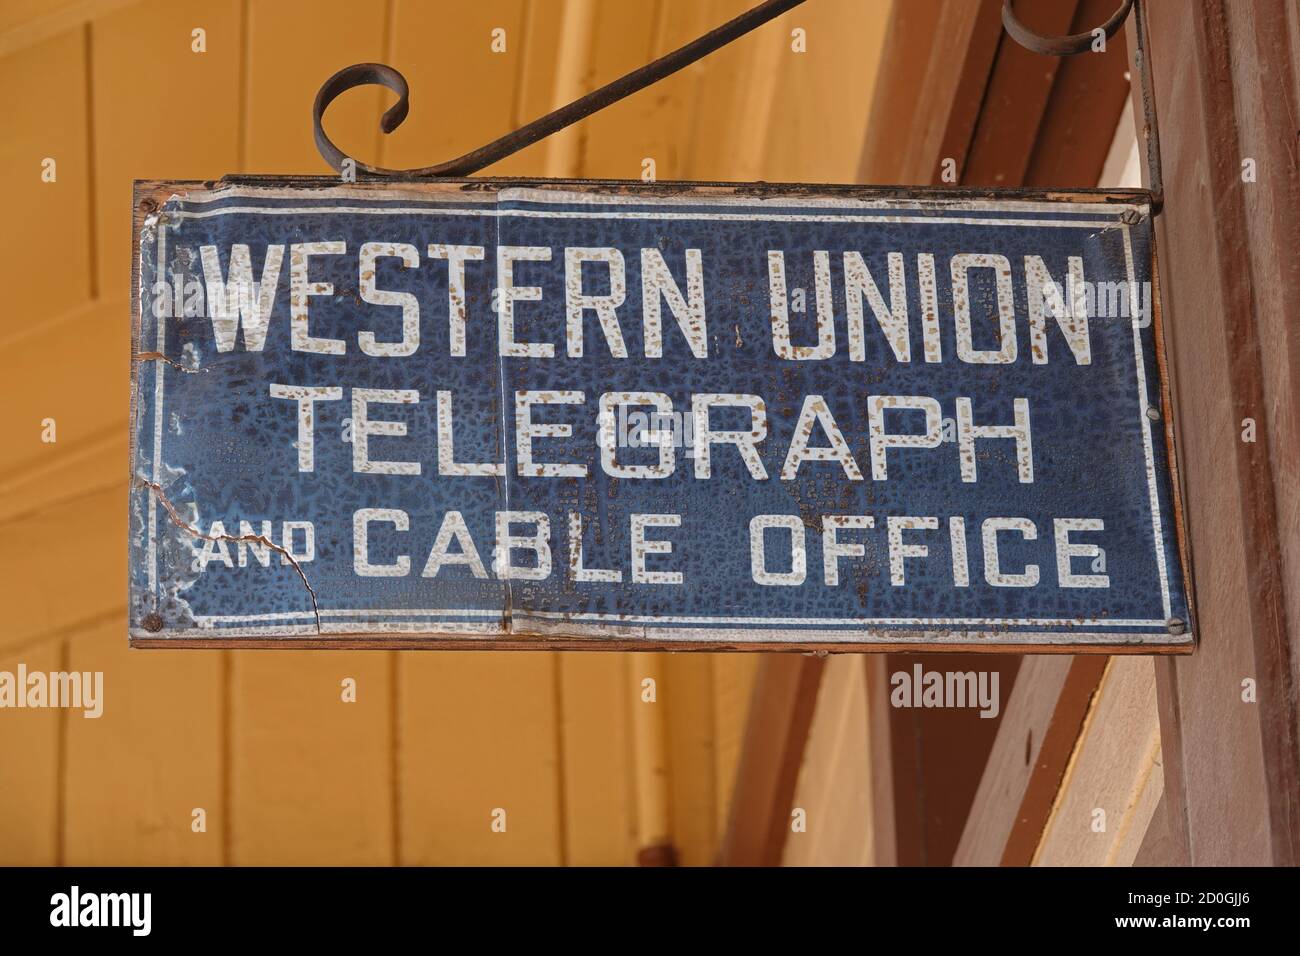 Santa Susana, CA / USA - July 15, 2020: A Western Union Telegraph and Cable Office vintage sign hangs outside a preserved train station in California. Stock Photo